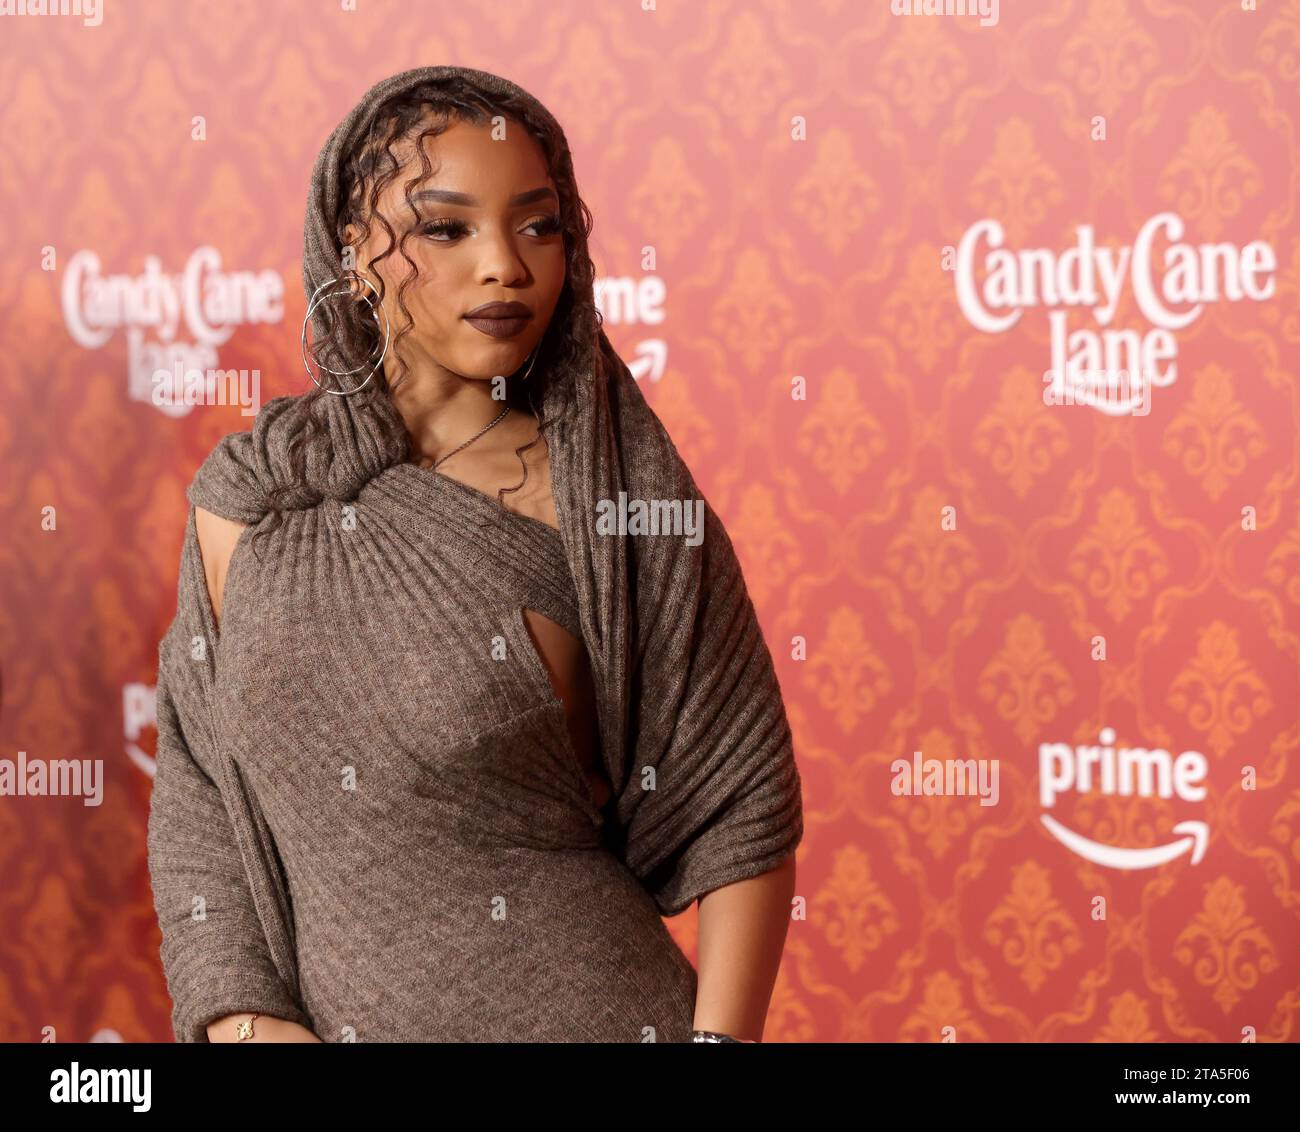 Los Angeles, United States. 28th Nov, 2023. Chlöe attends the world premiere of Amazon Prime Video's 'Candy Cane Lane' at Regency Village Theatre in Los Angeles, California on November 28, 2023. Storyline: A man is determined to win the neighborhood's annual Christmas decorating contest. He makes a pact with an elf to help him win--and the elf casts a spell that brings the 12 days of Christmas to life, which brings unexpected chaos to town. Photo by Greg Grudt/UPI Credit: UPI/Alamy Live News Stock Photo